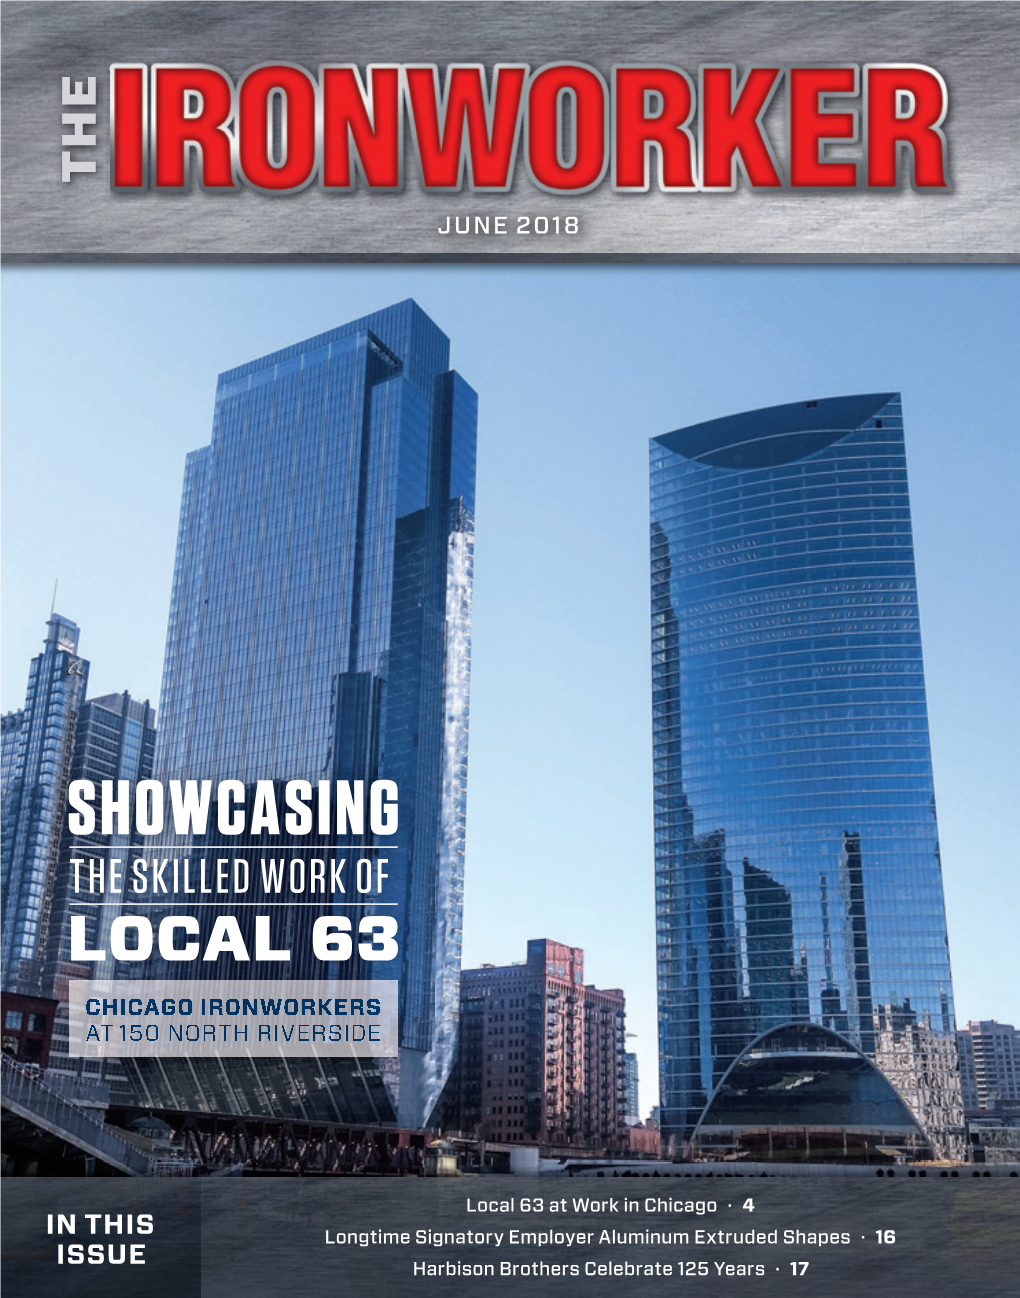 Showcasing the Skilled Work of Local 63 Chicago Ironworkers at 150 North Riverside